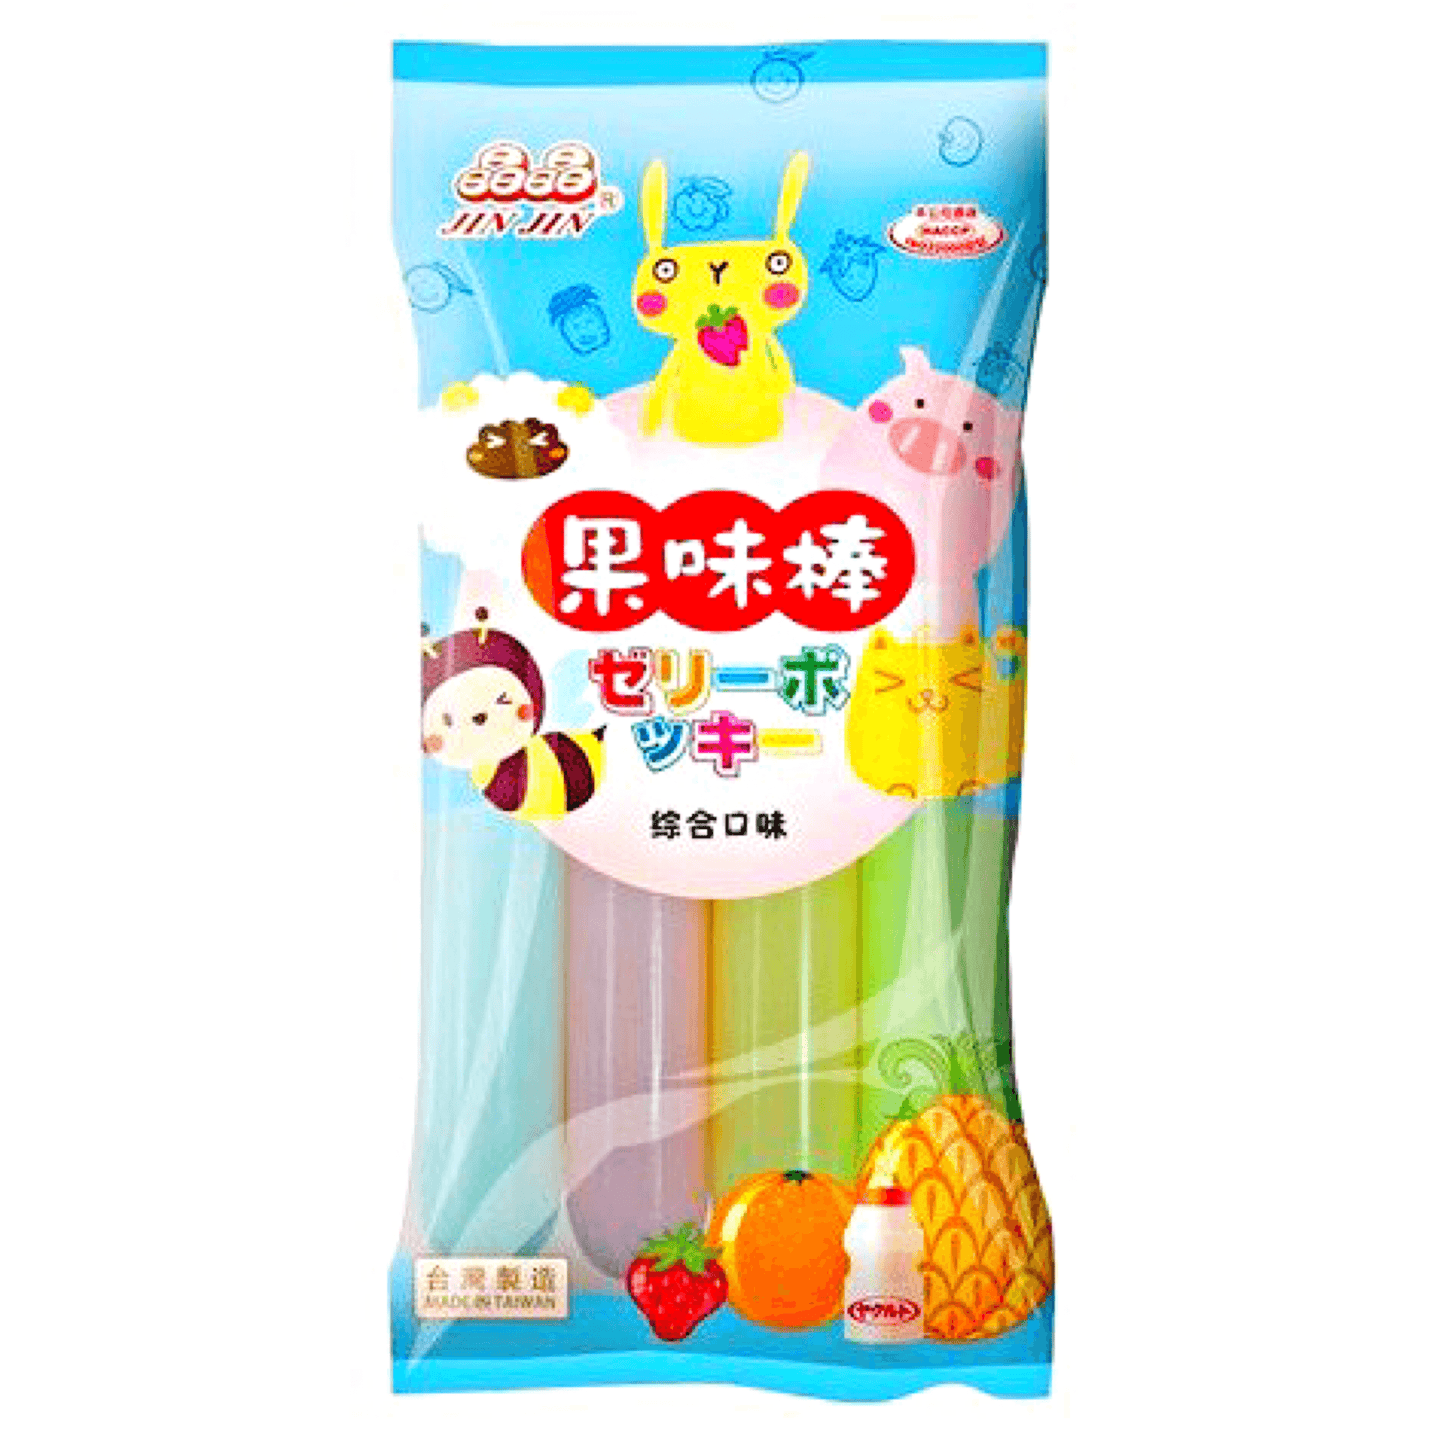 Jin Jin Pop Glace Jelly Assorted Flavors 680ml - The Snacks Box - Asian Snacks Store - The Snacks Box - Korean Snack - Japanese Snack